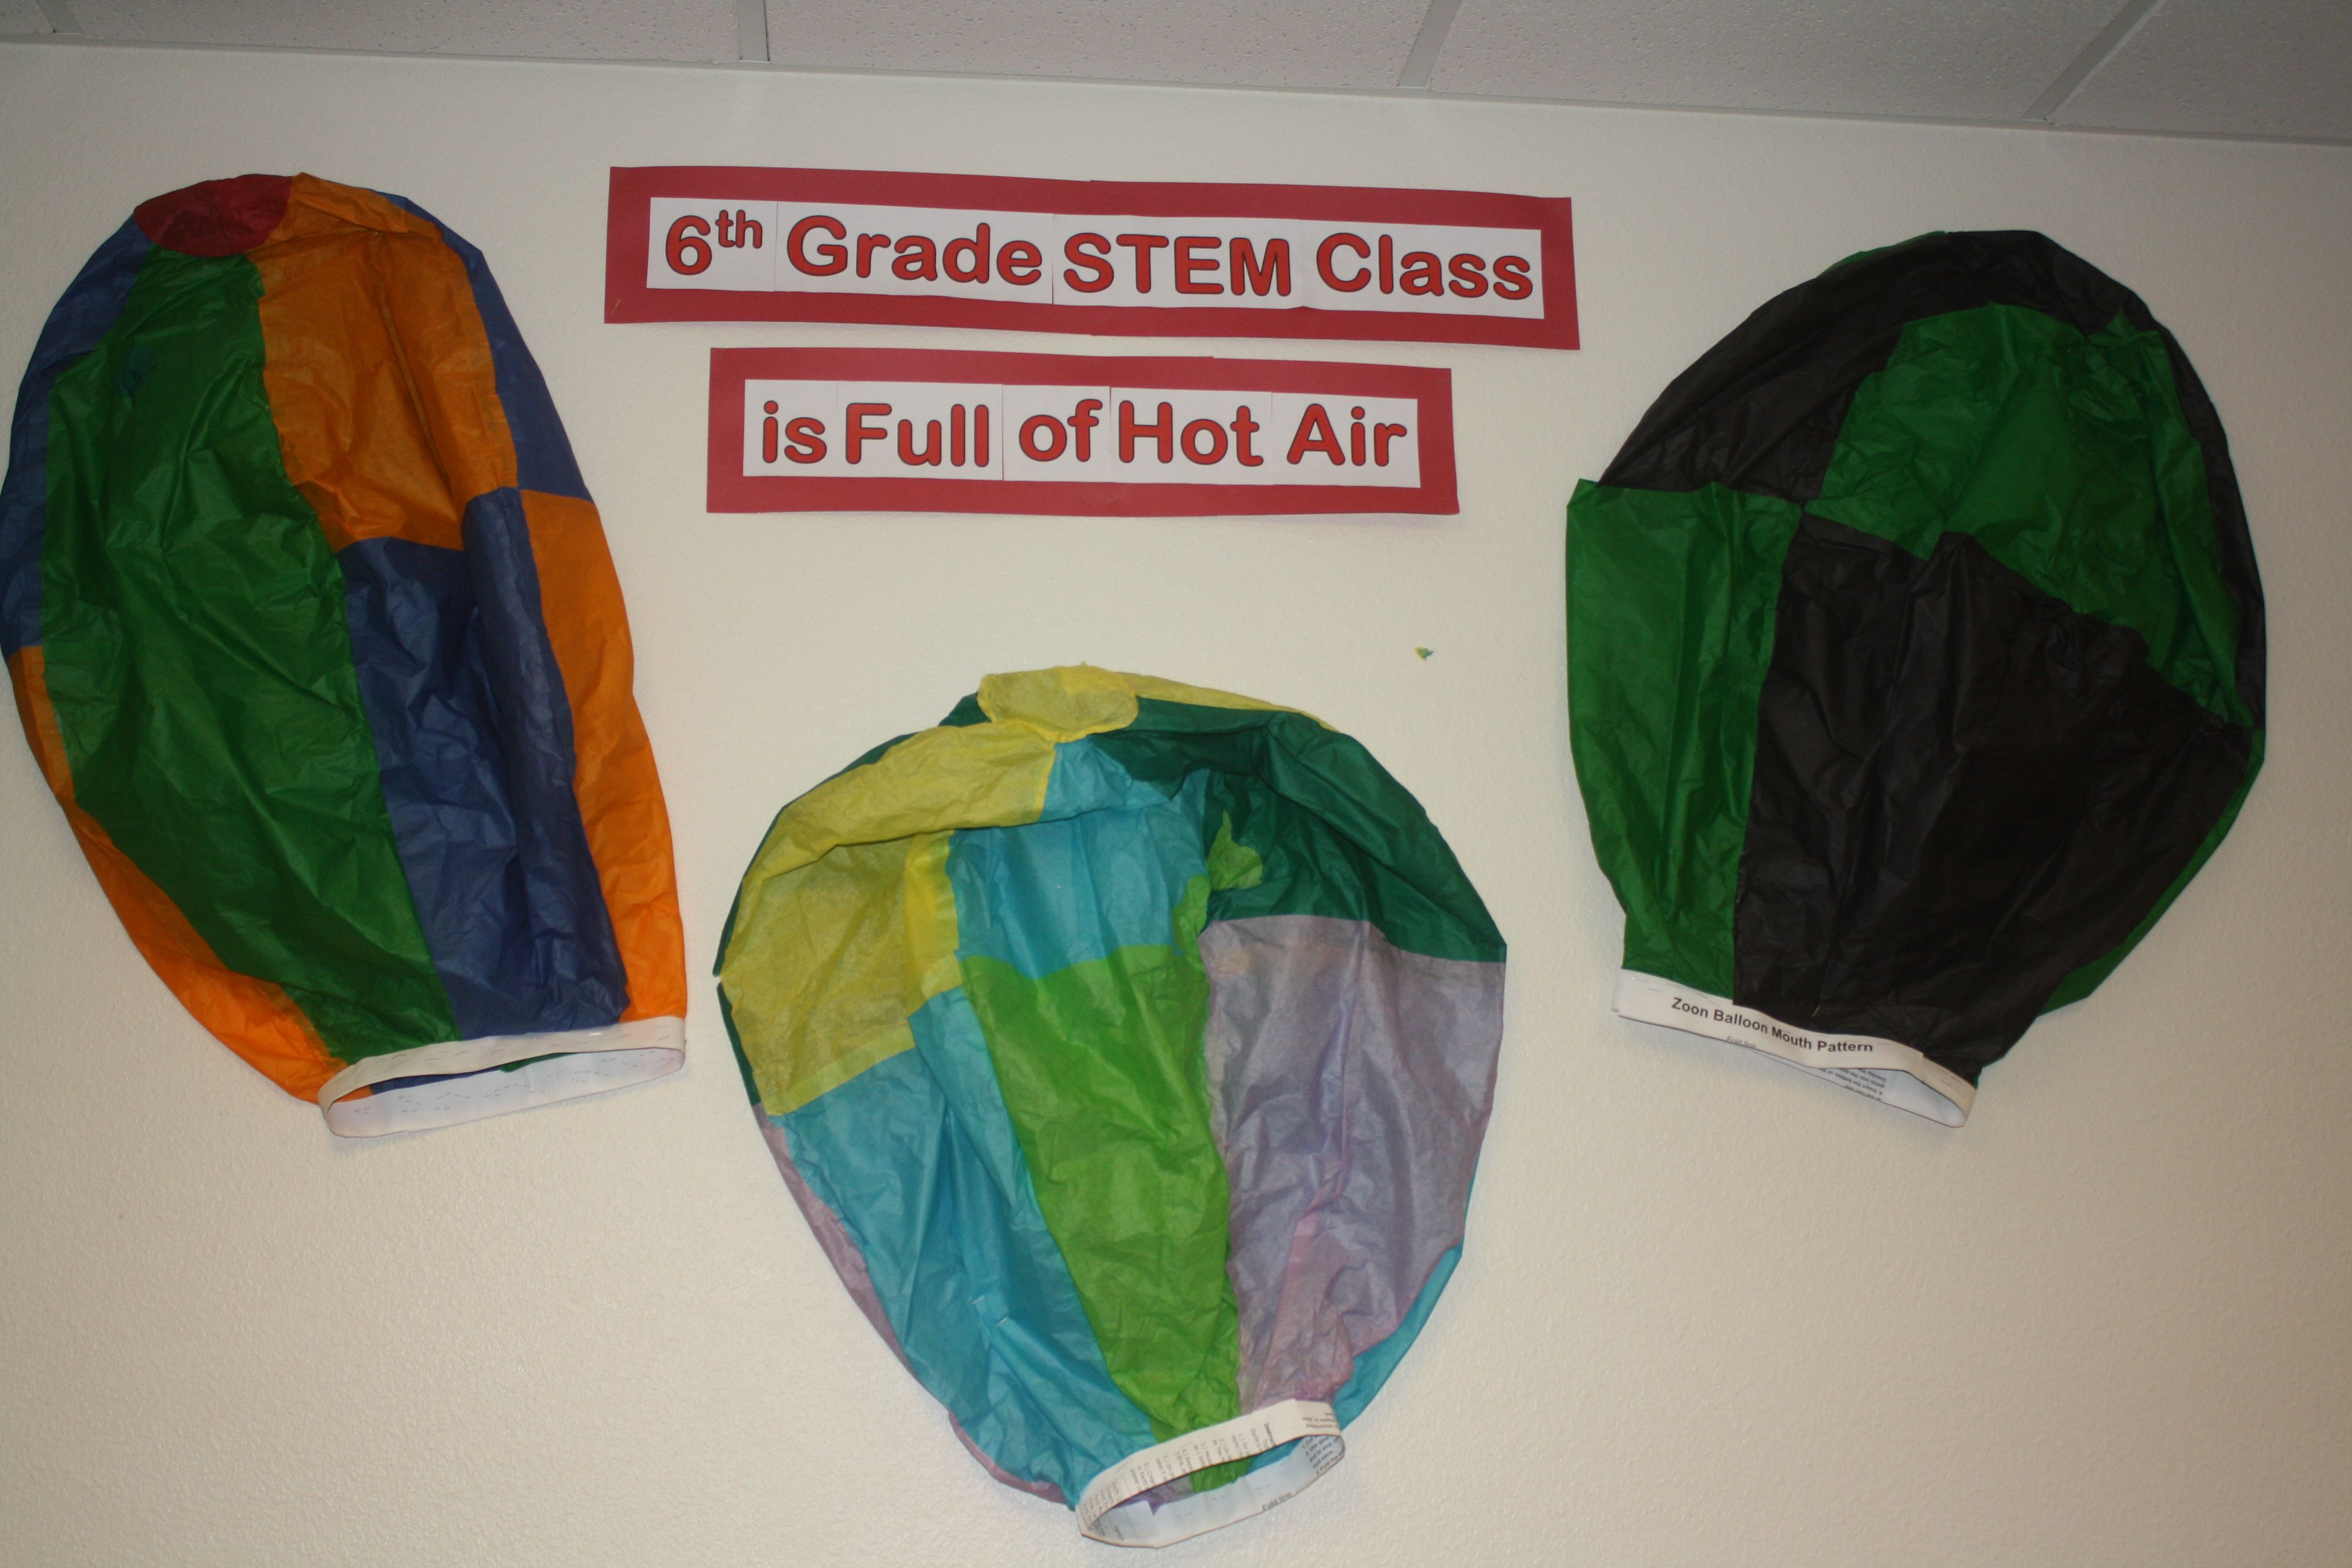 6th Grade STEM Class is Full of Hot Air - activity.